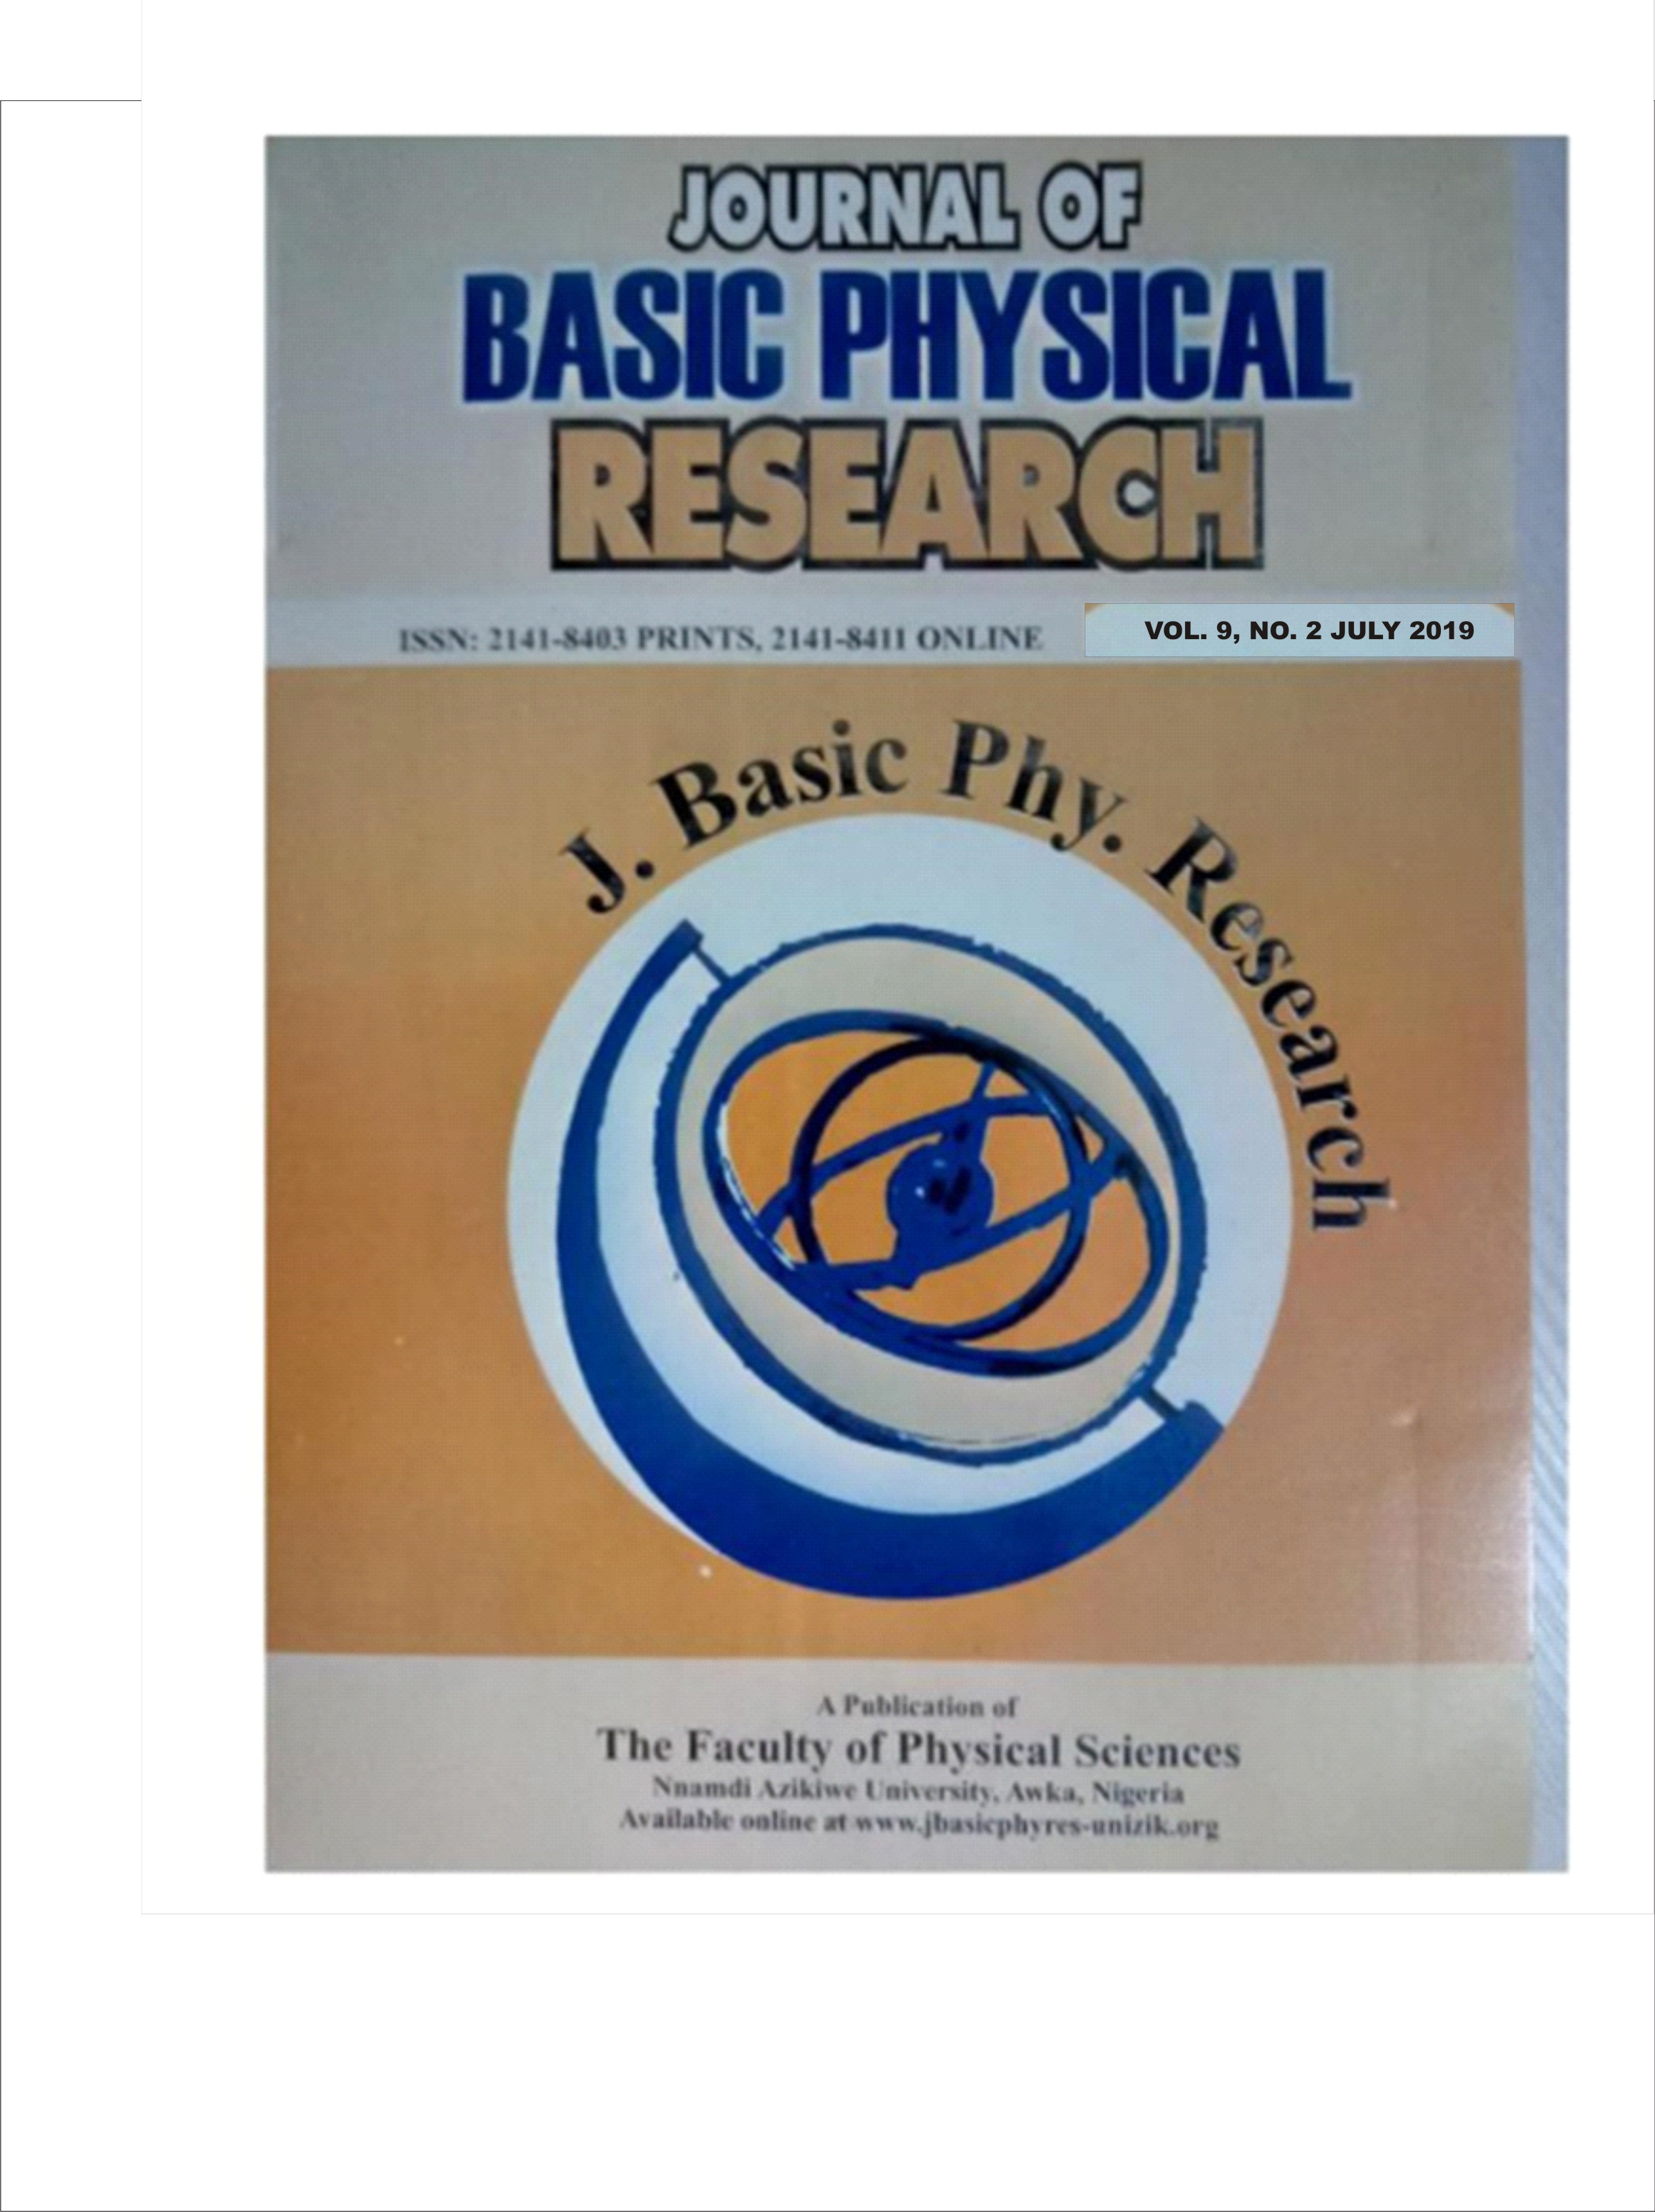 					View Vol. 9 No. 2 (2019): JOURNAL OF BASIC PHYSICAL RESEARCH
				